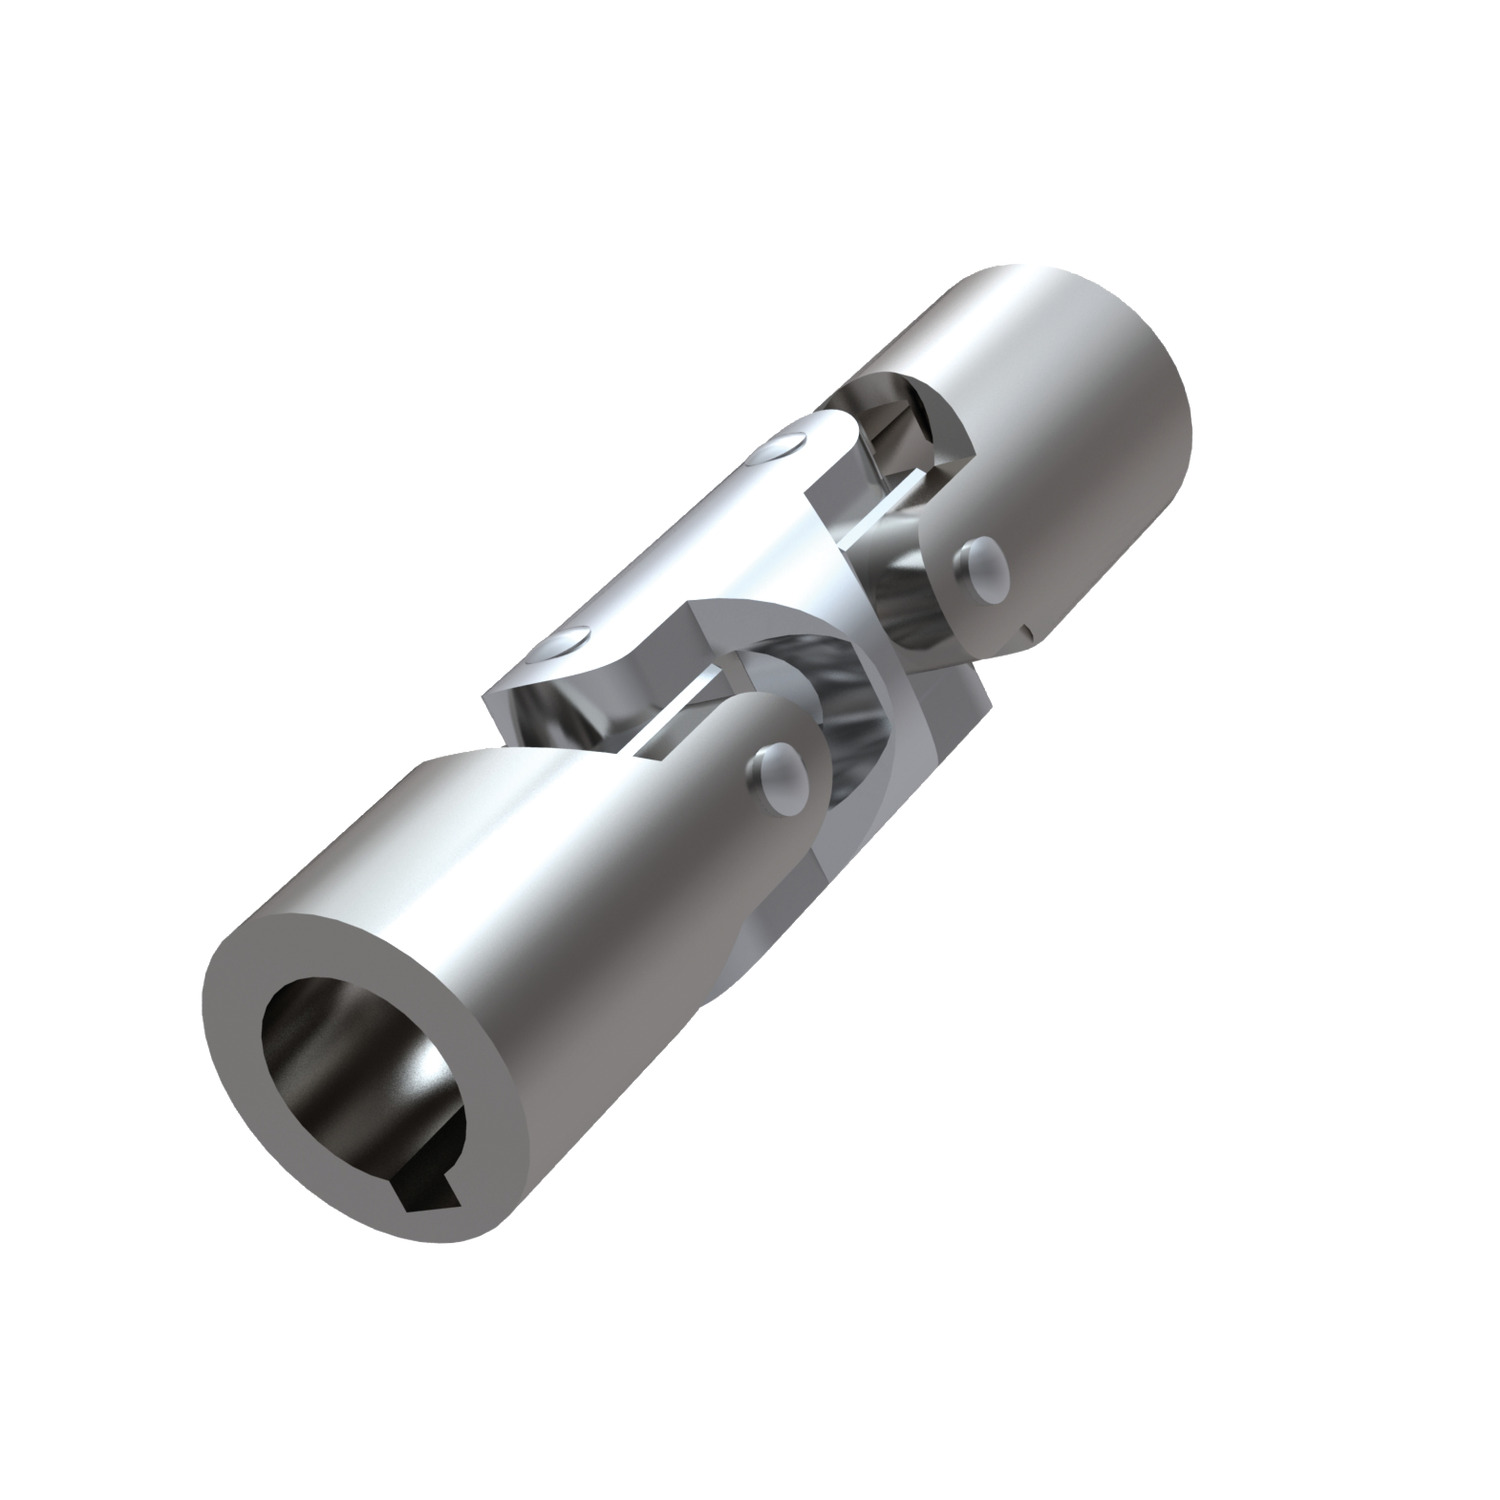 Stainless Double Universal Joint Stainless steel double universal joints. Manufactured to DIN 808. Maximum bending angle of 45° per joint. Round bore and keyway available.